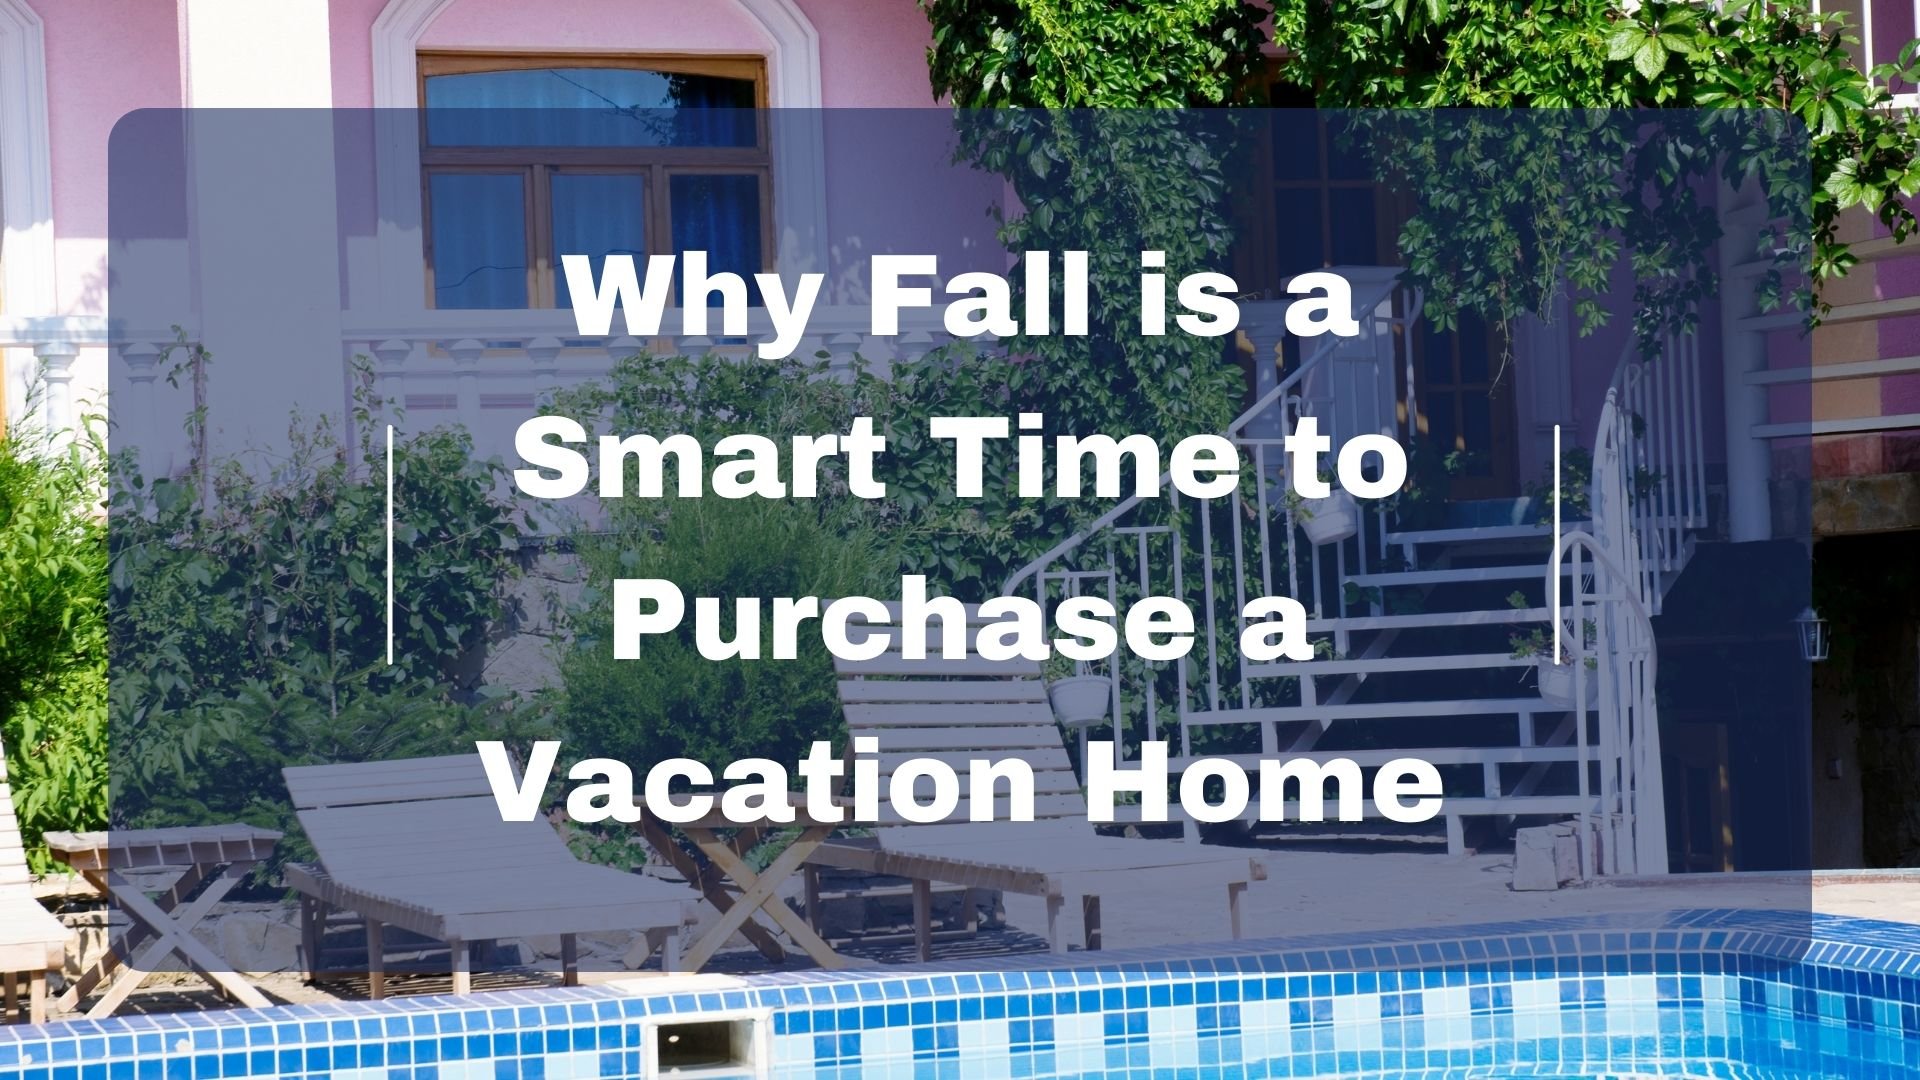 Why Fall is a Smart Time to Purchase a Vacation Home